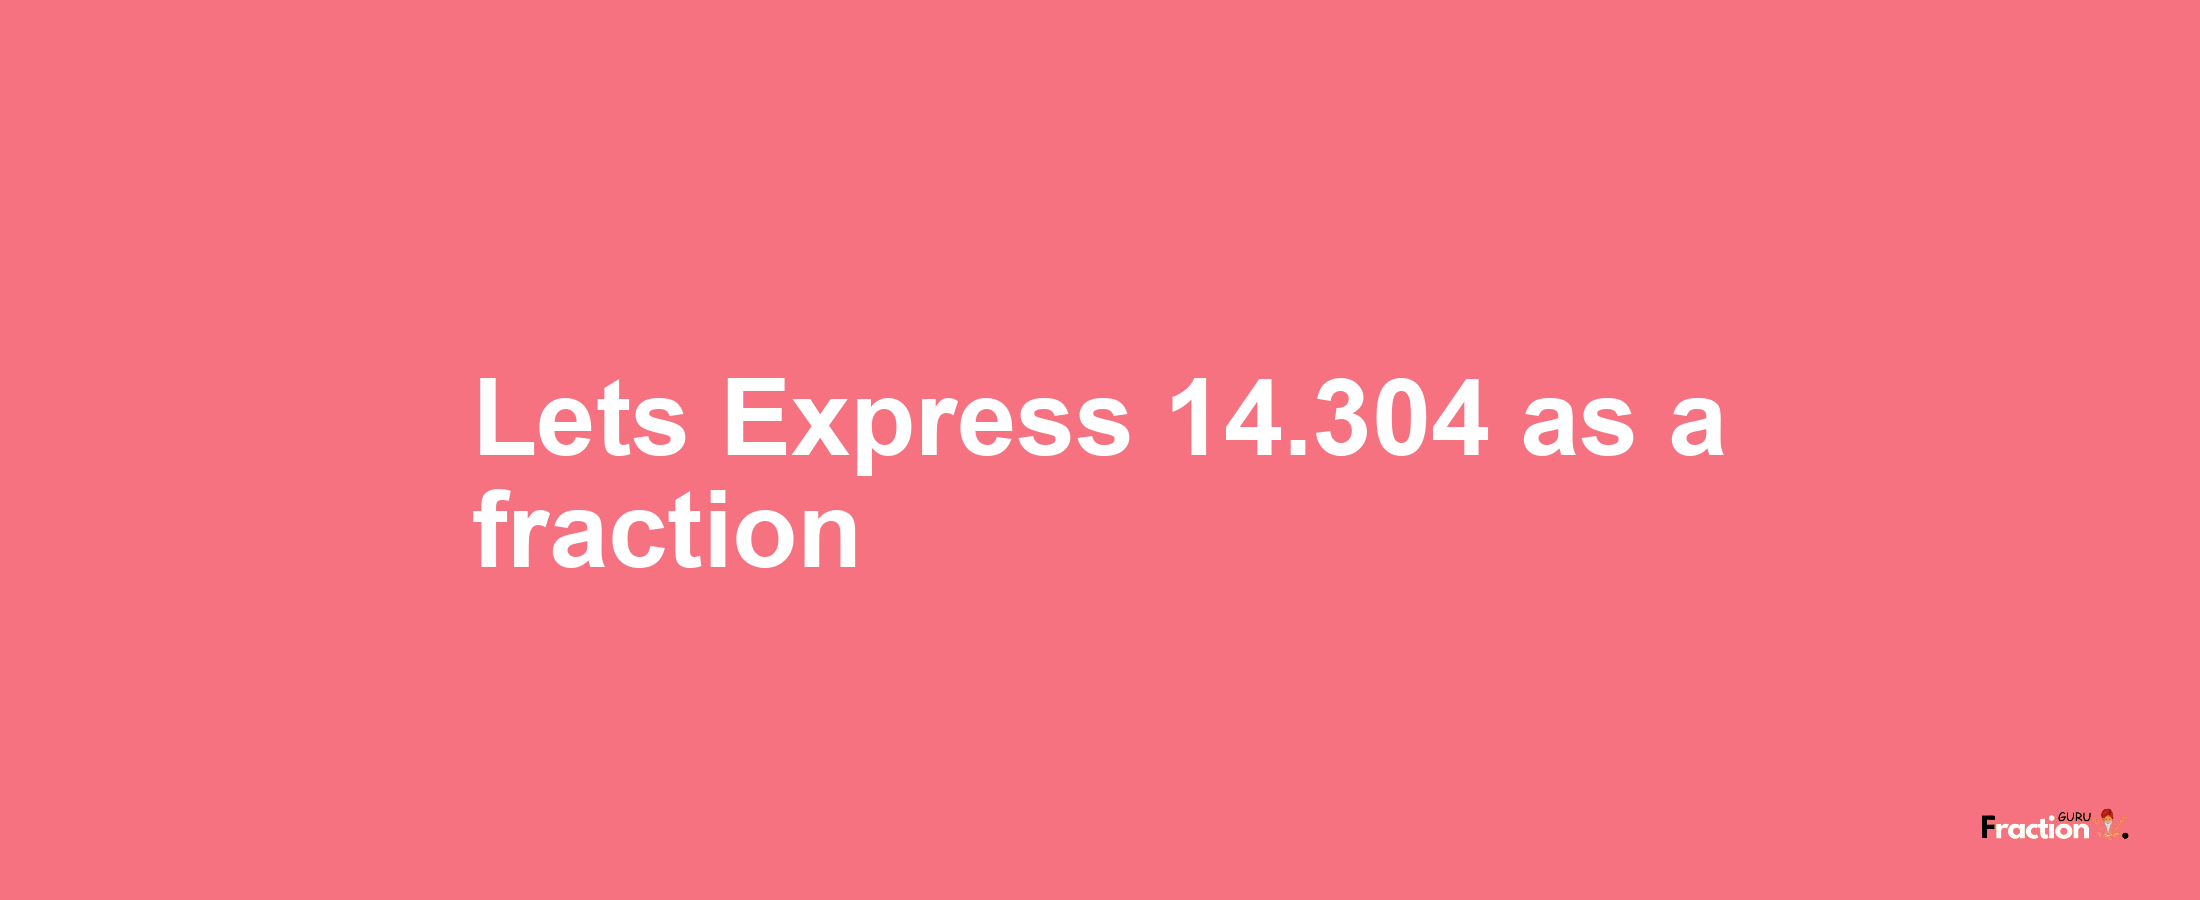 Lets Express 14.304 as afraction